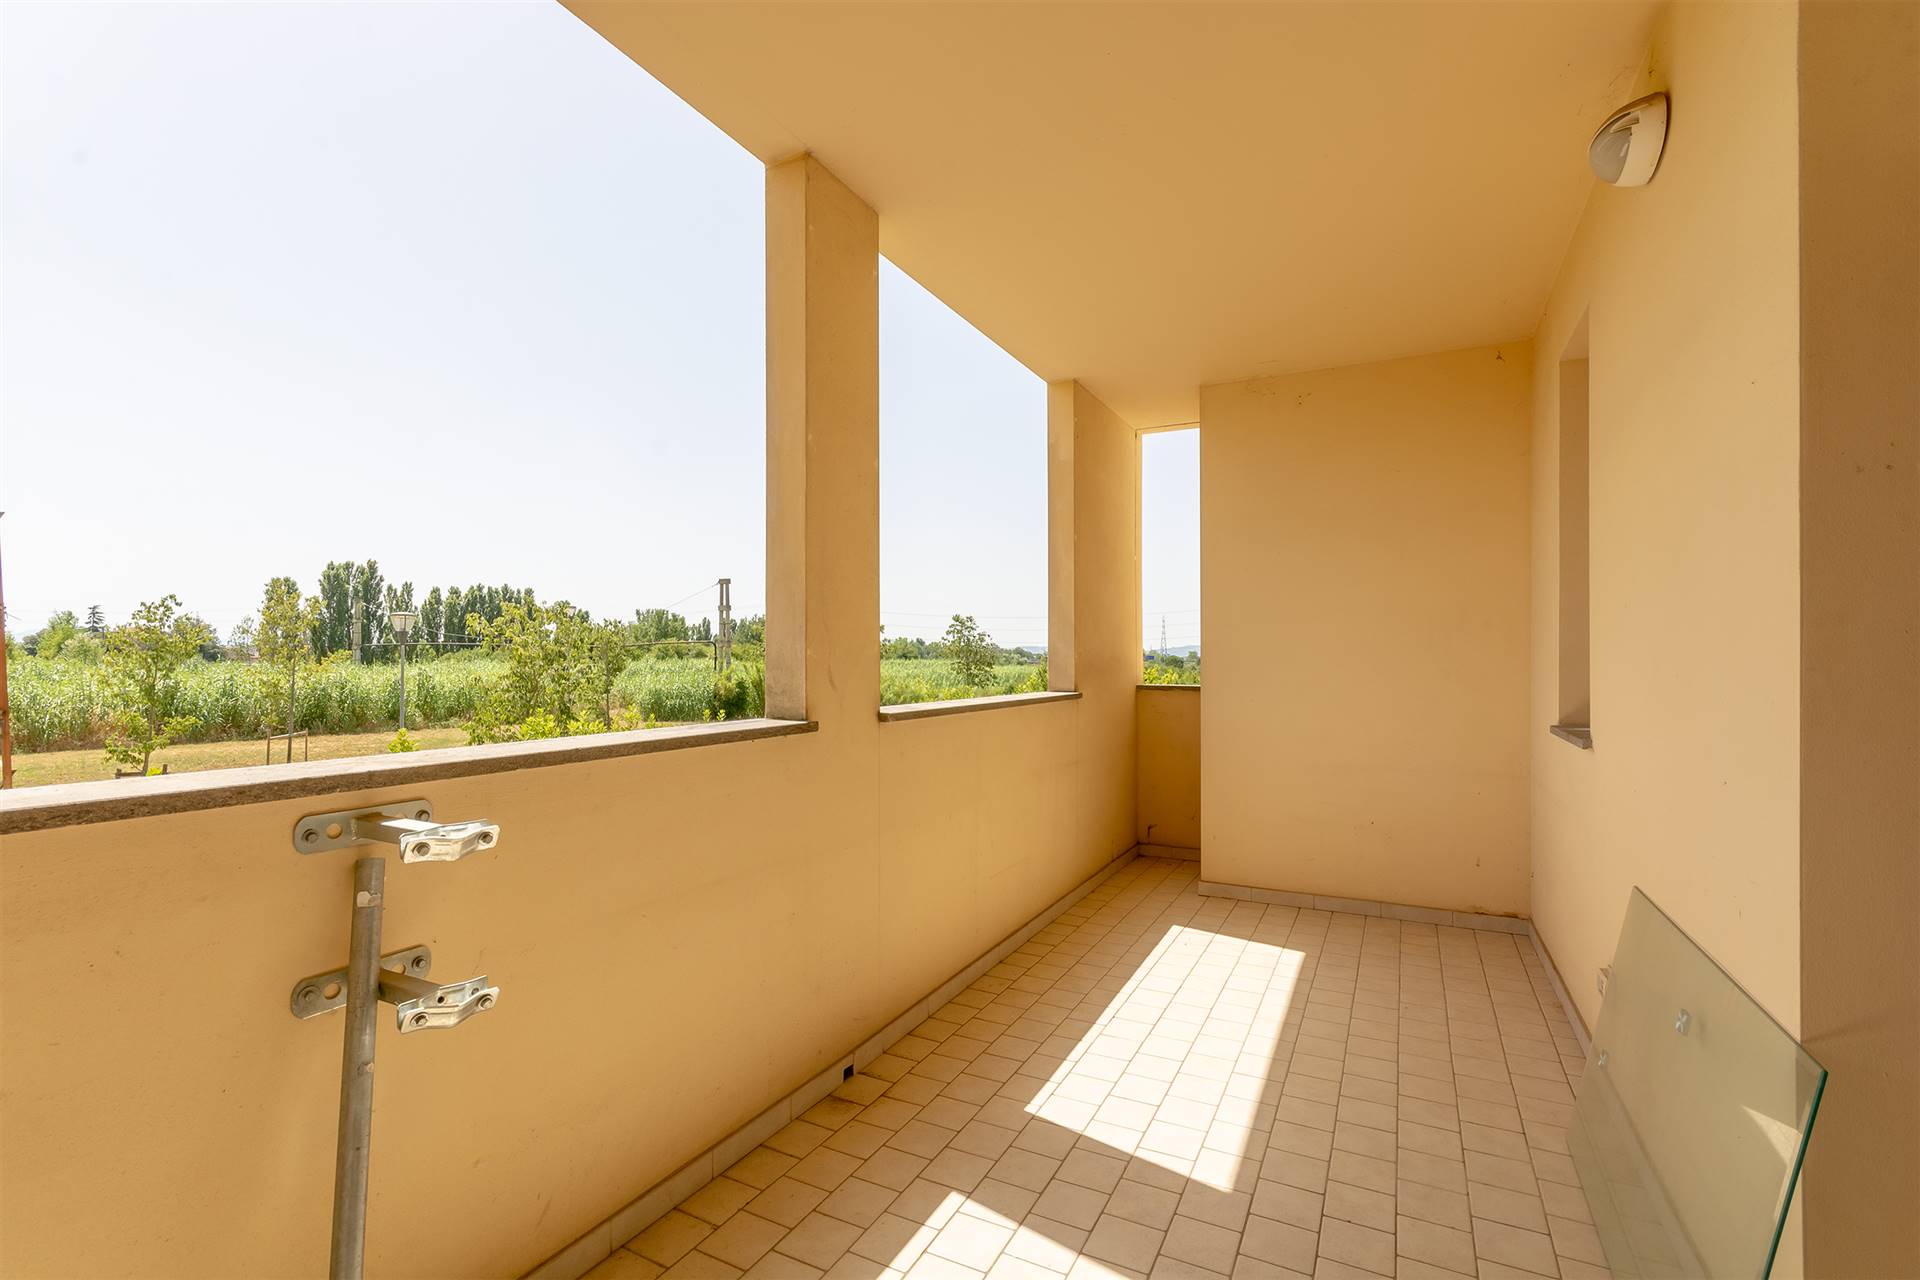 IL ROSI, CAMPI BISENZIO, Apartment for sale of 54 Sq. mt., Excellent Condition, Heating Individual heating system, Energetic class: E, Epi: 112,71 